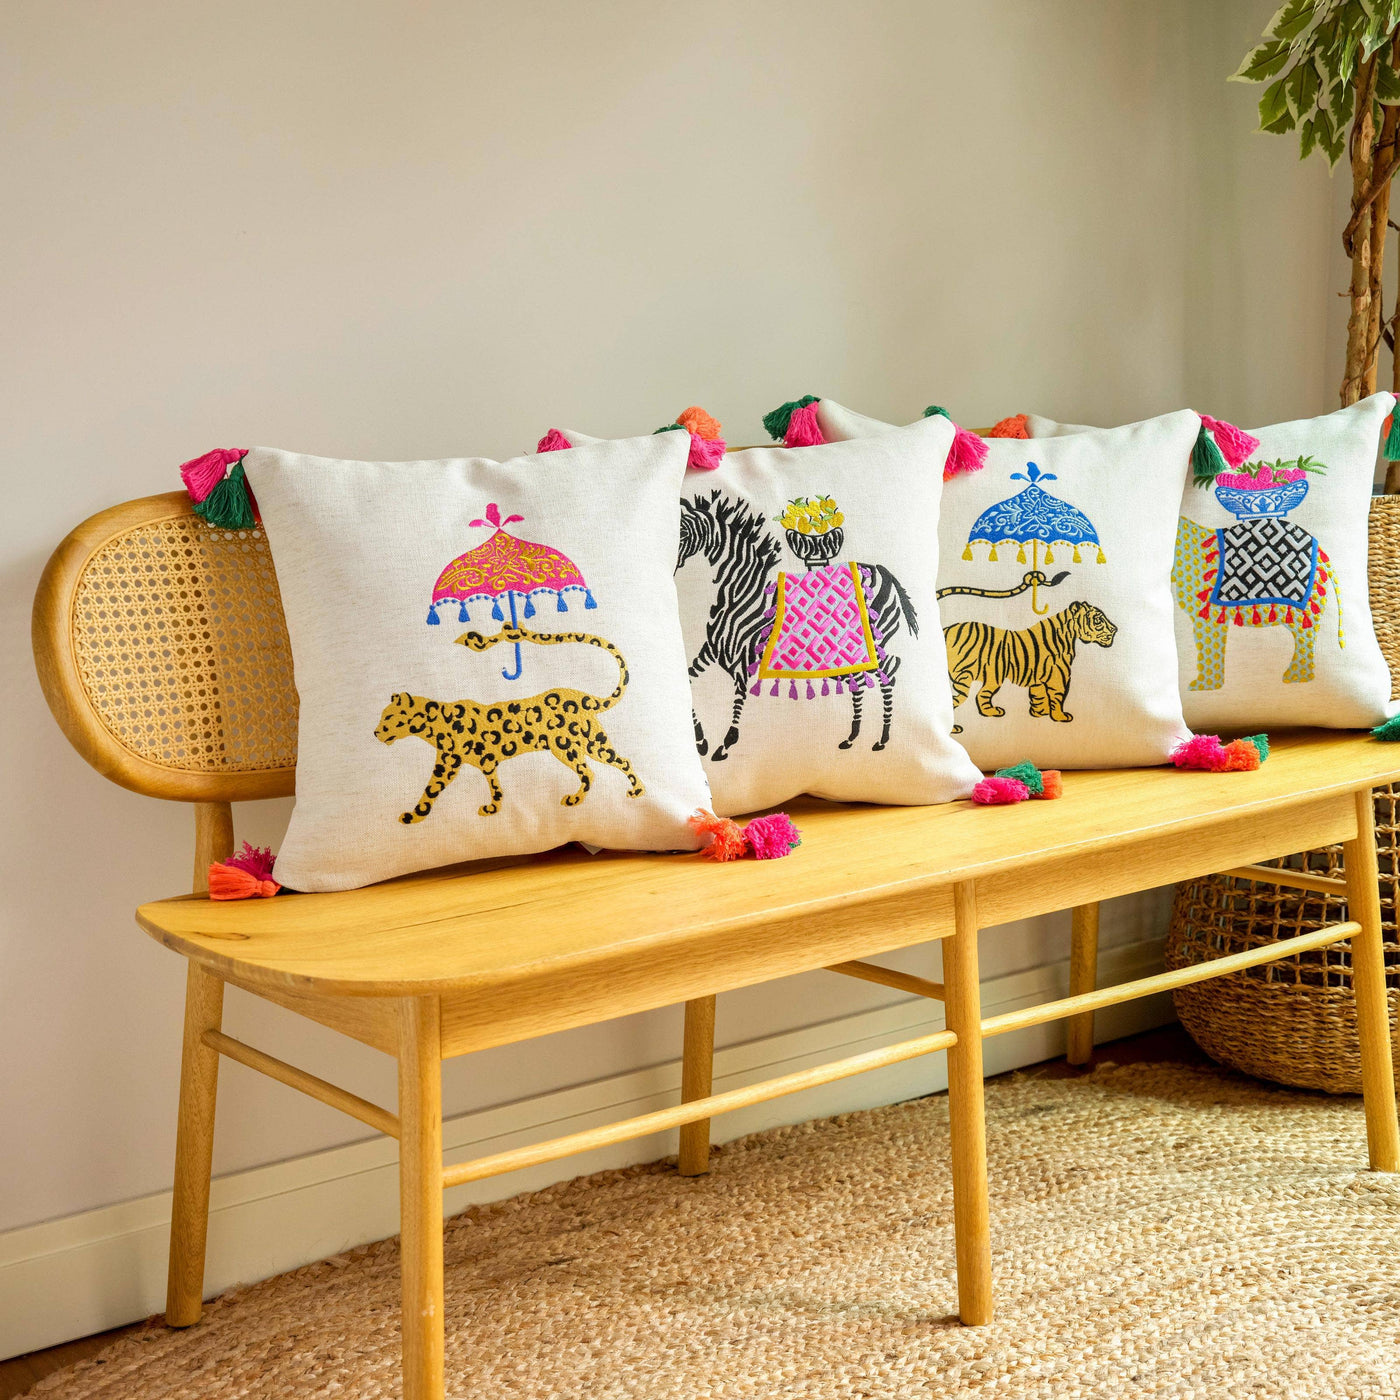 Jojen Embroidered Cushion Cover, Off-White, 45x45 cm Cushion Covers sazy.com